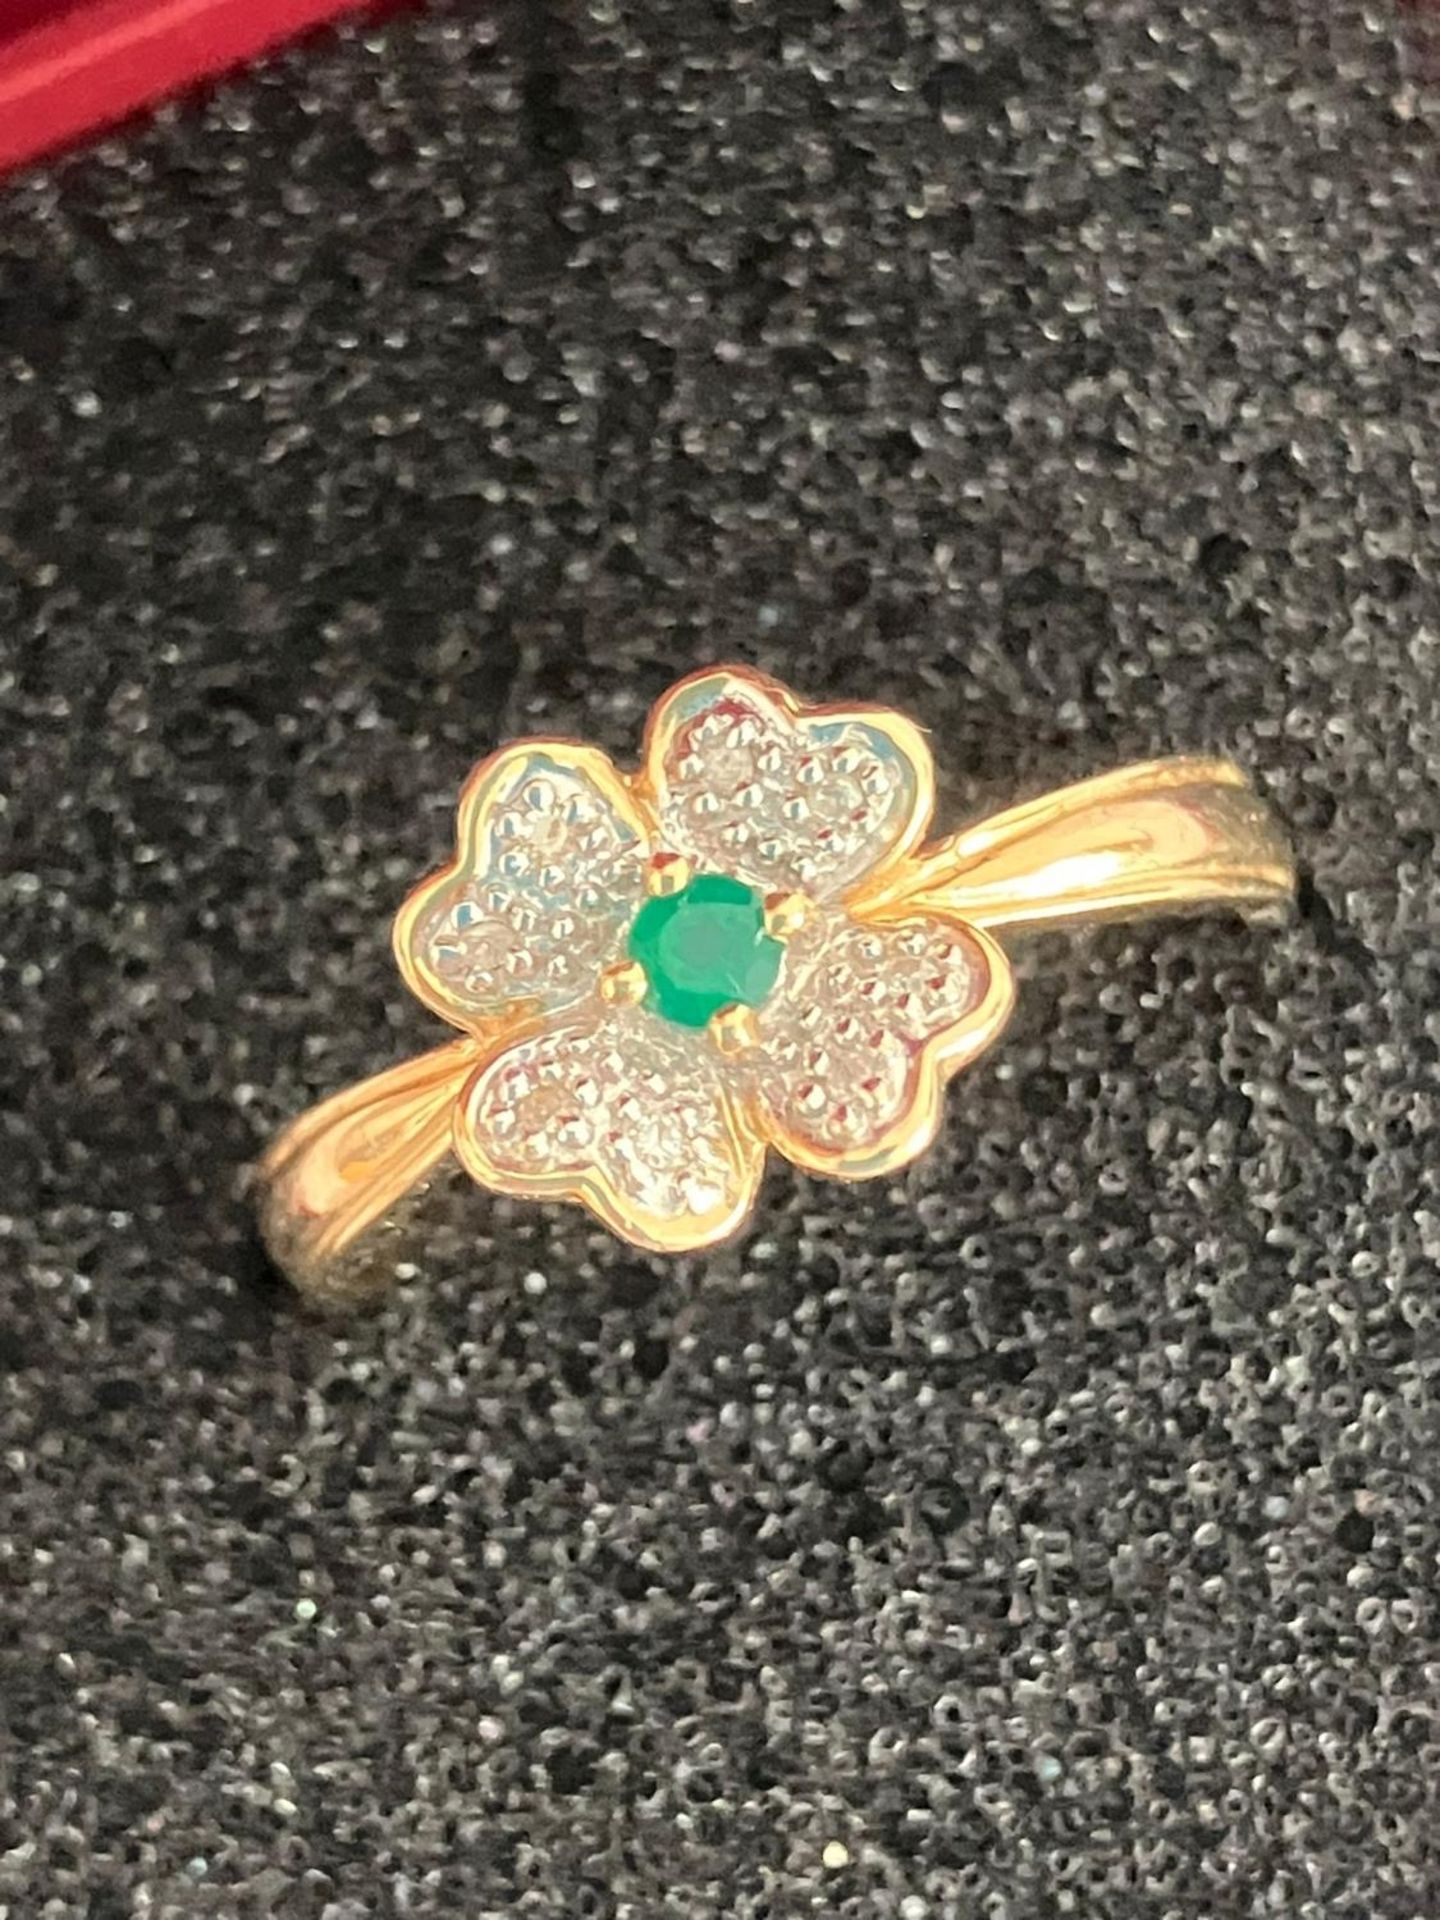 9 carat ‘Four leaf clover’ GOLD RING Set with DIAMONDS and EMERALD. Full hallmark. Complete with - Image 2 of 2